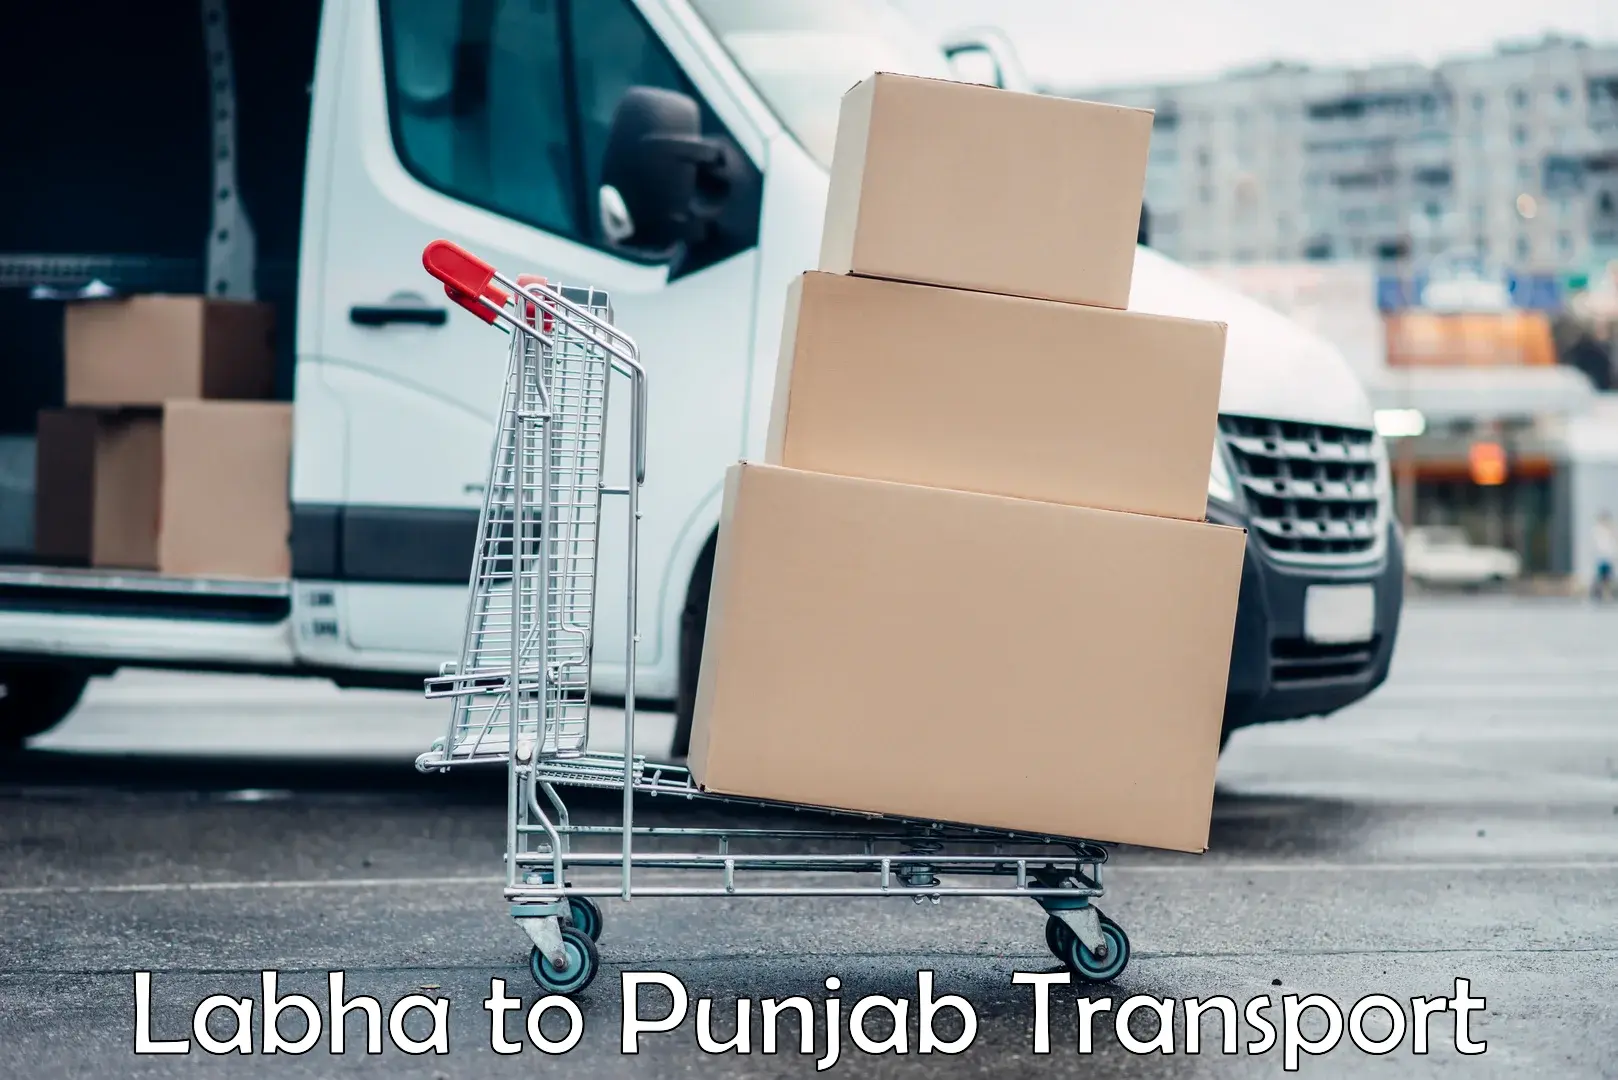 Inland transportation services Labha to Mohali